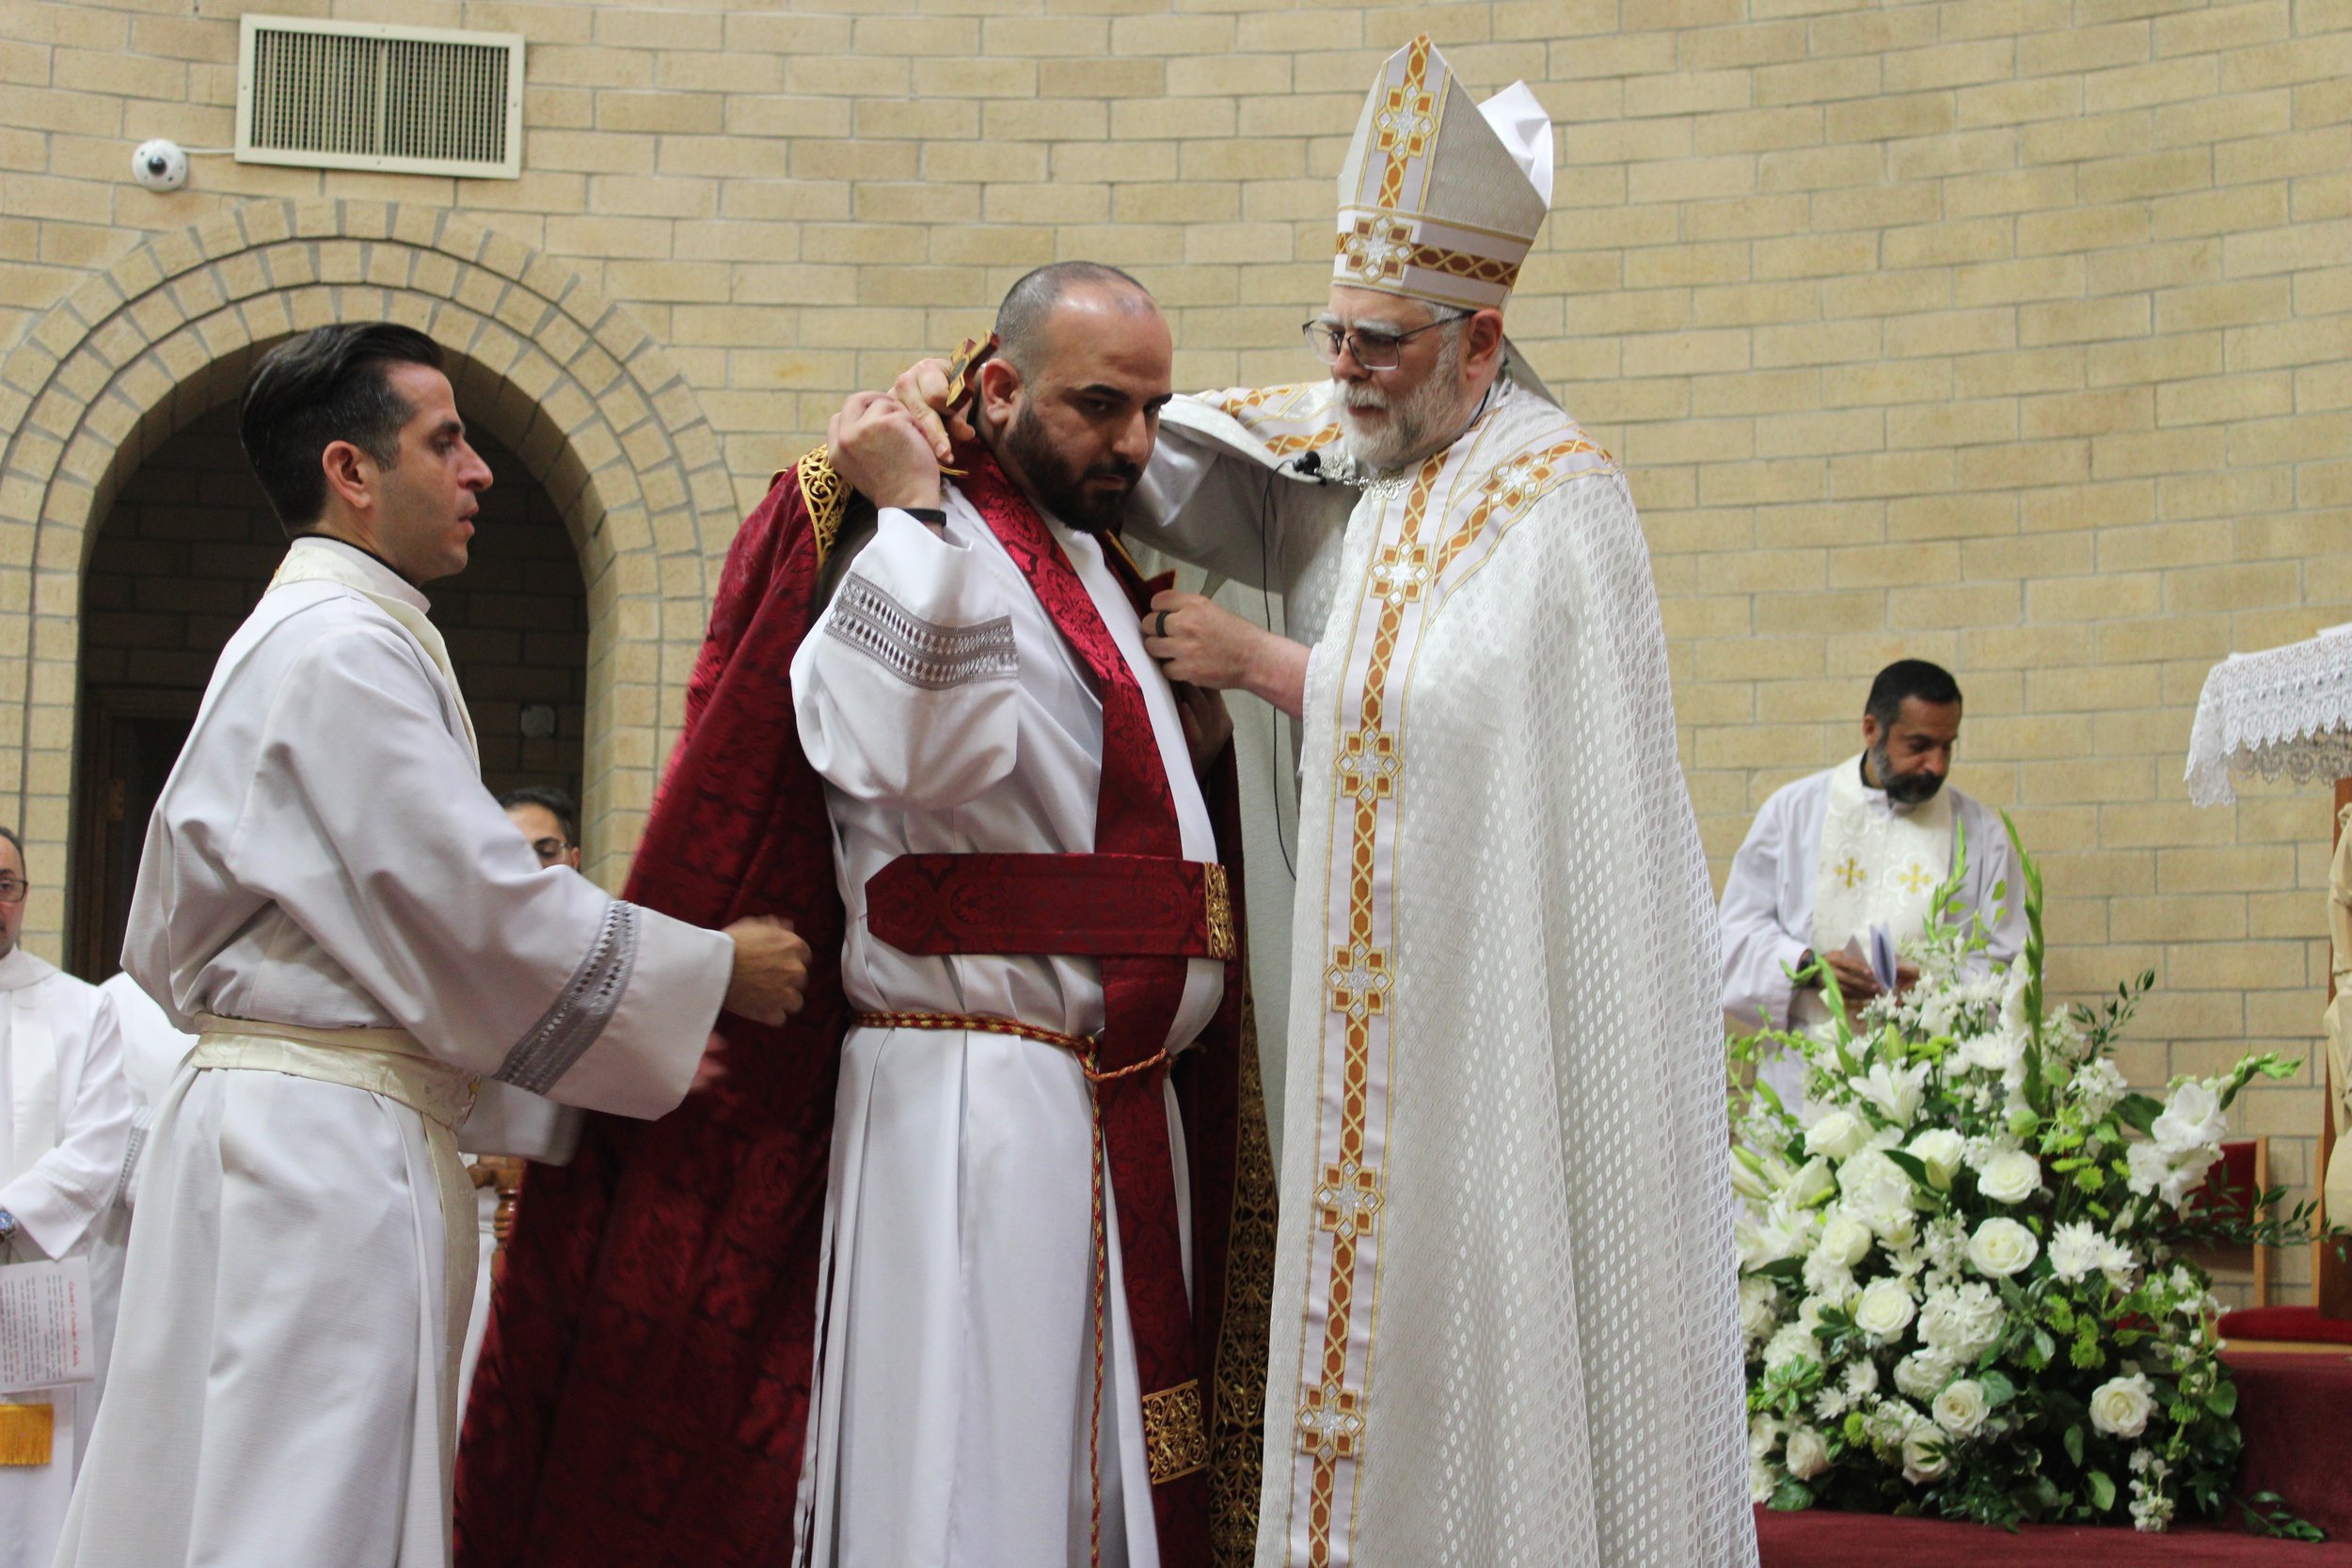  Bishop Francis placing the priest’s cope on a newly ordained Fr. Namir with help from Fr. Bryan Kassa. 